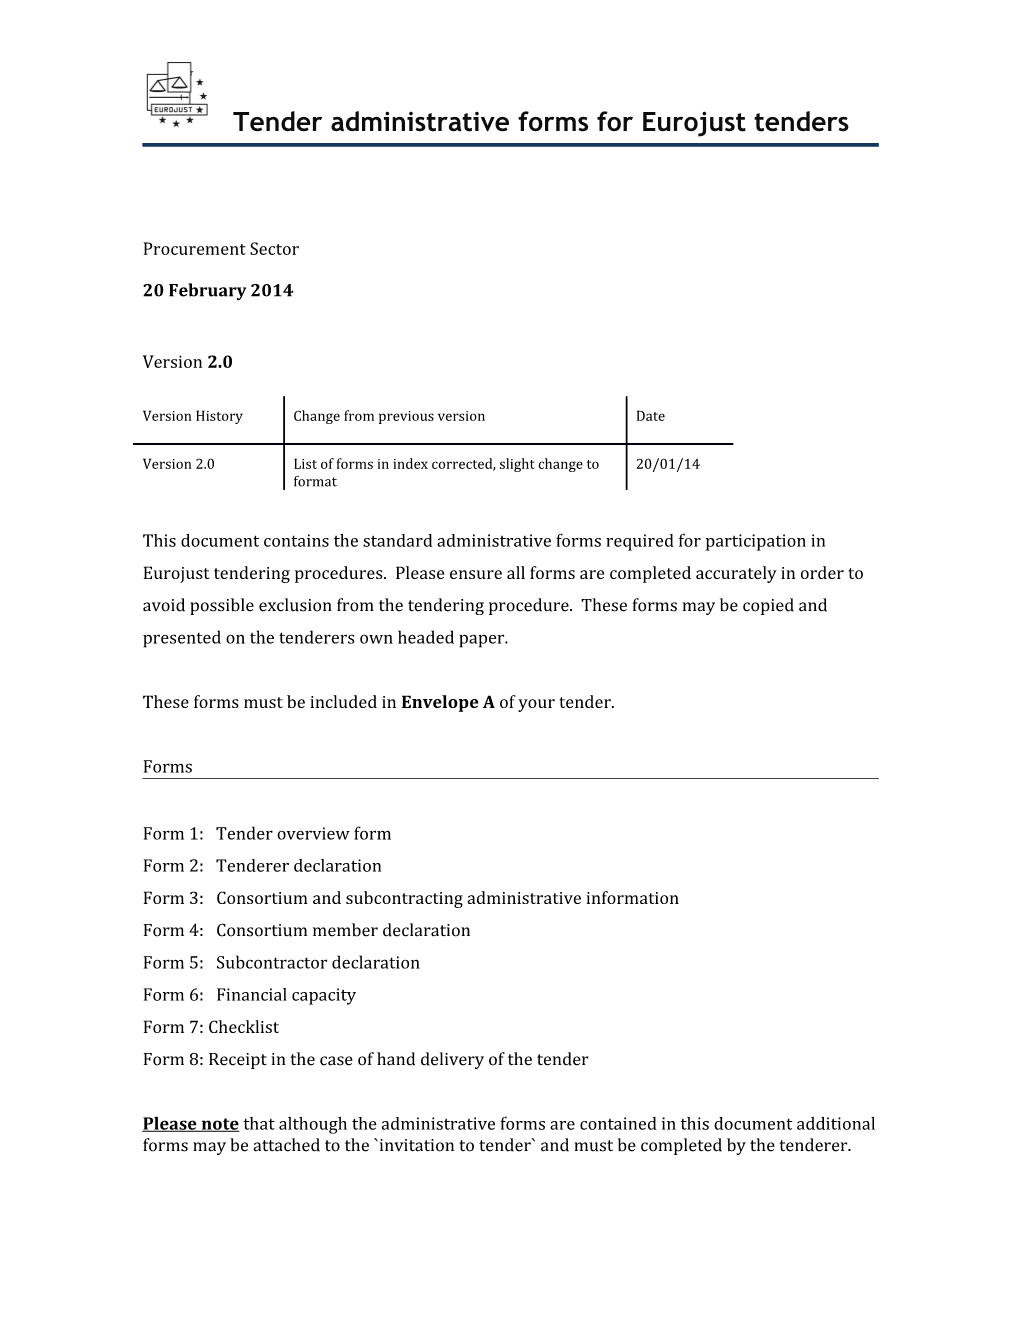 Tender Administrative Forms Ver2